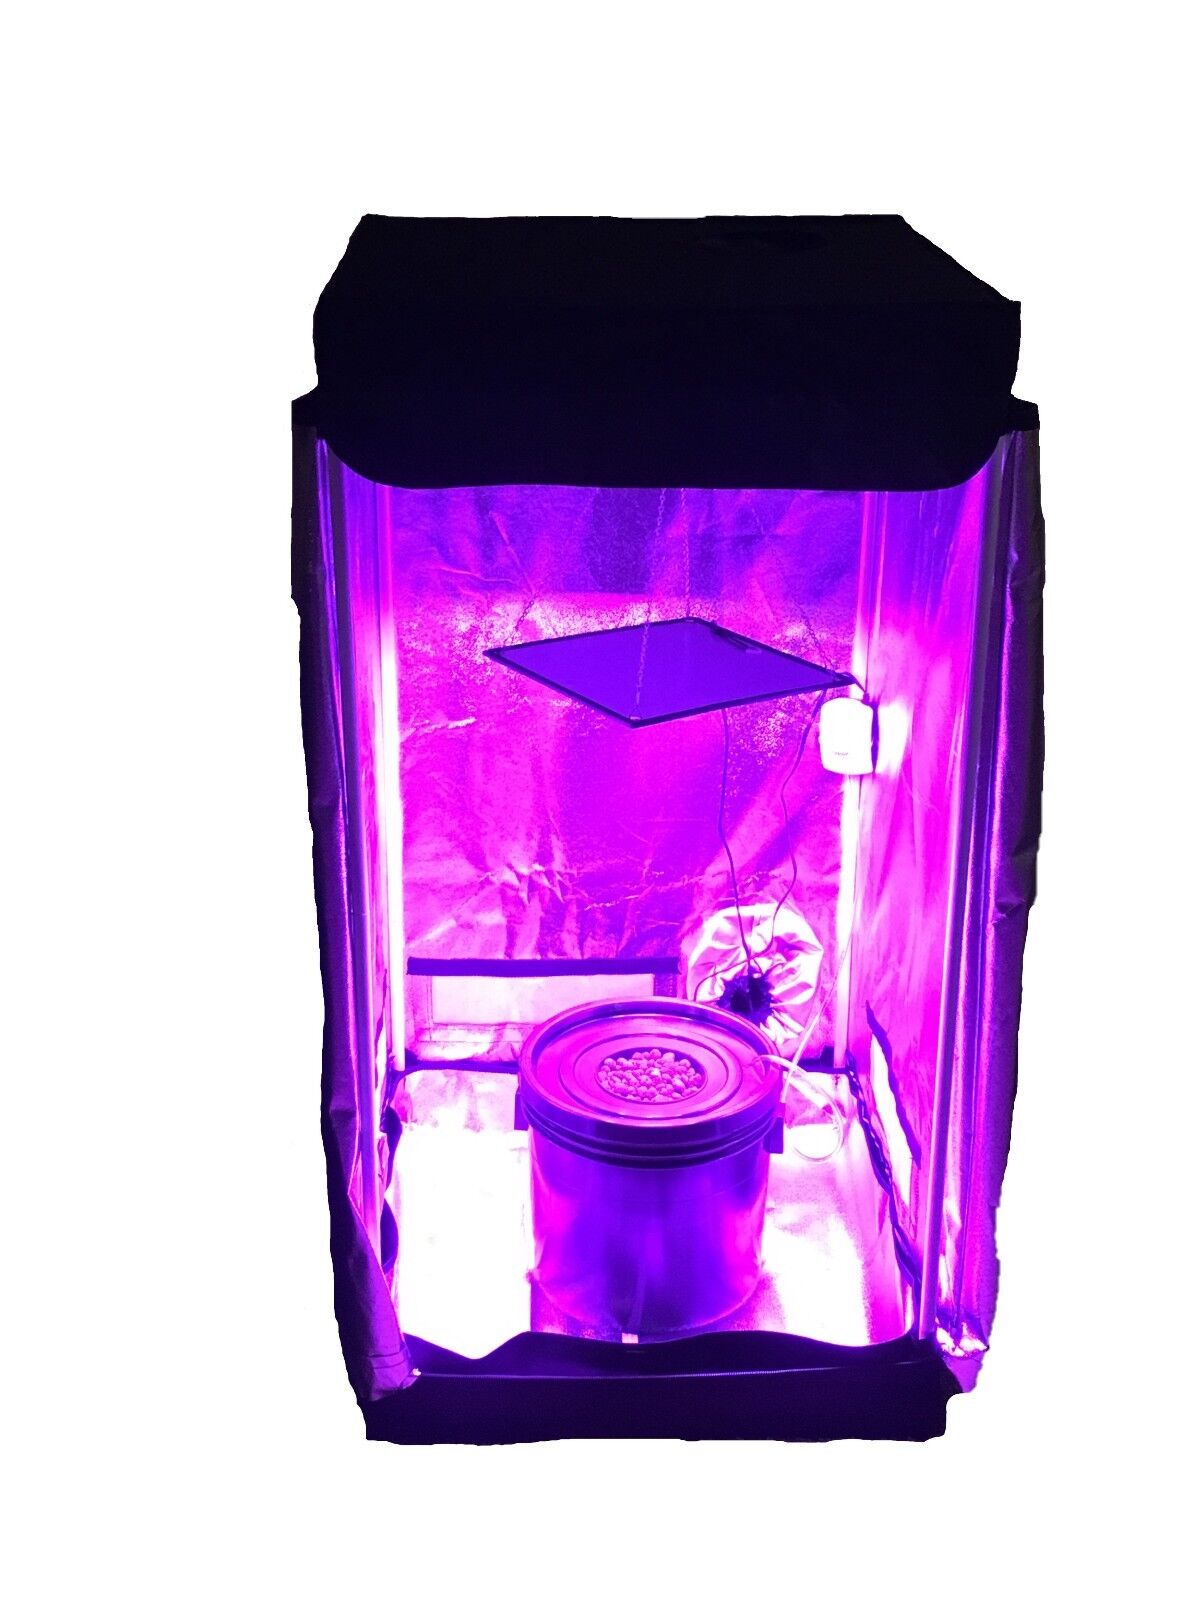 1 Site Hydroponic System Grow Room - Complete Grow Tent Kit DWC - LED Grow Light